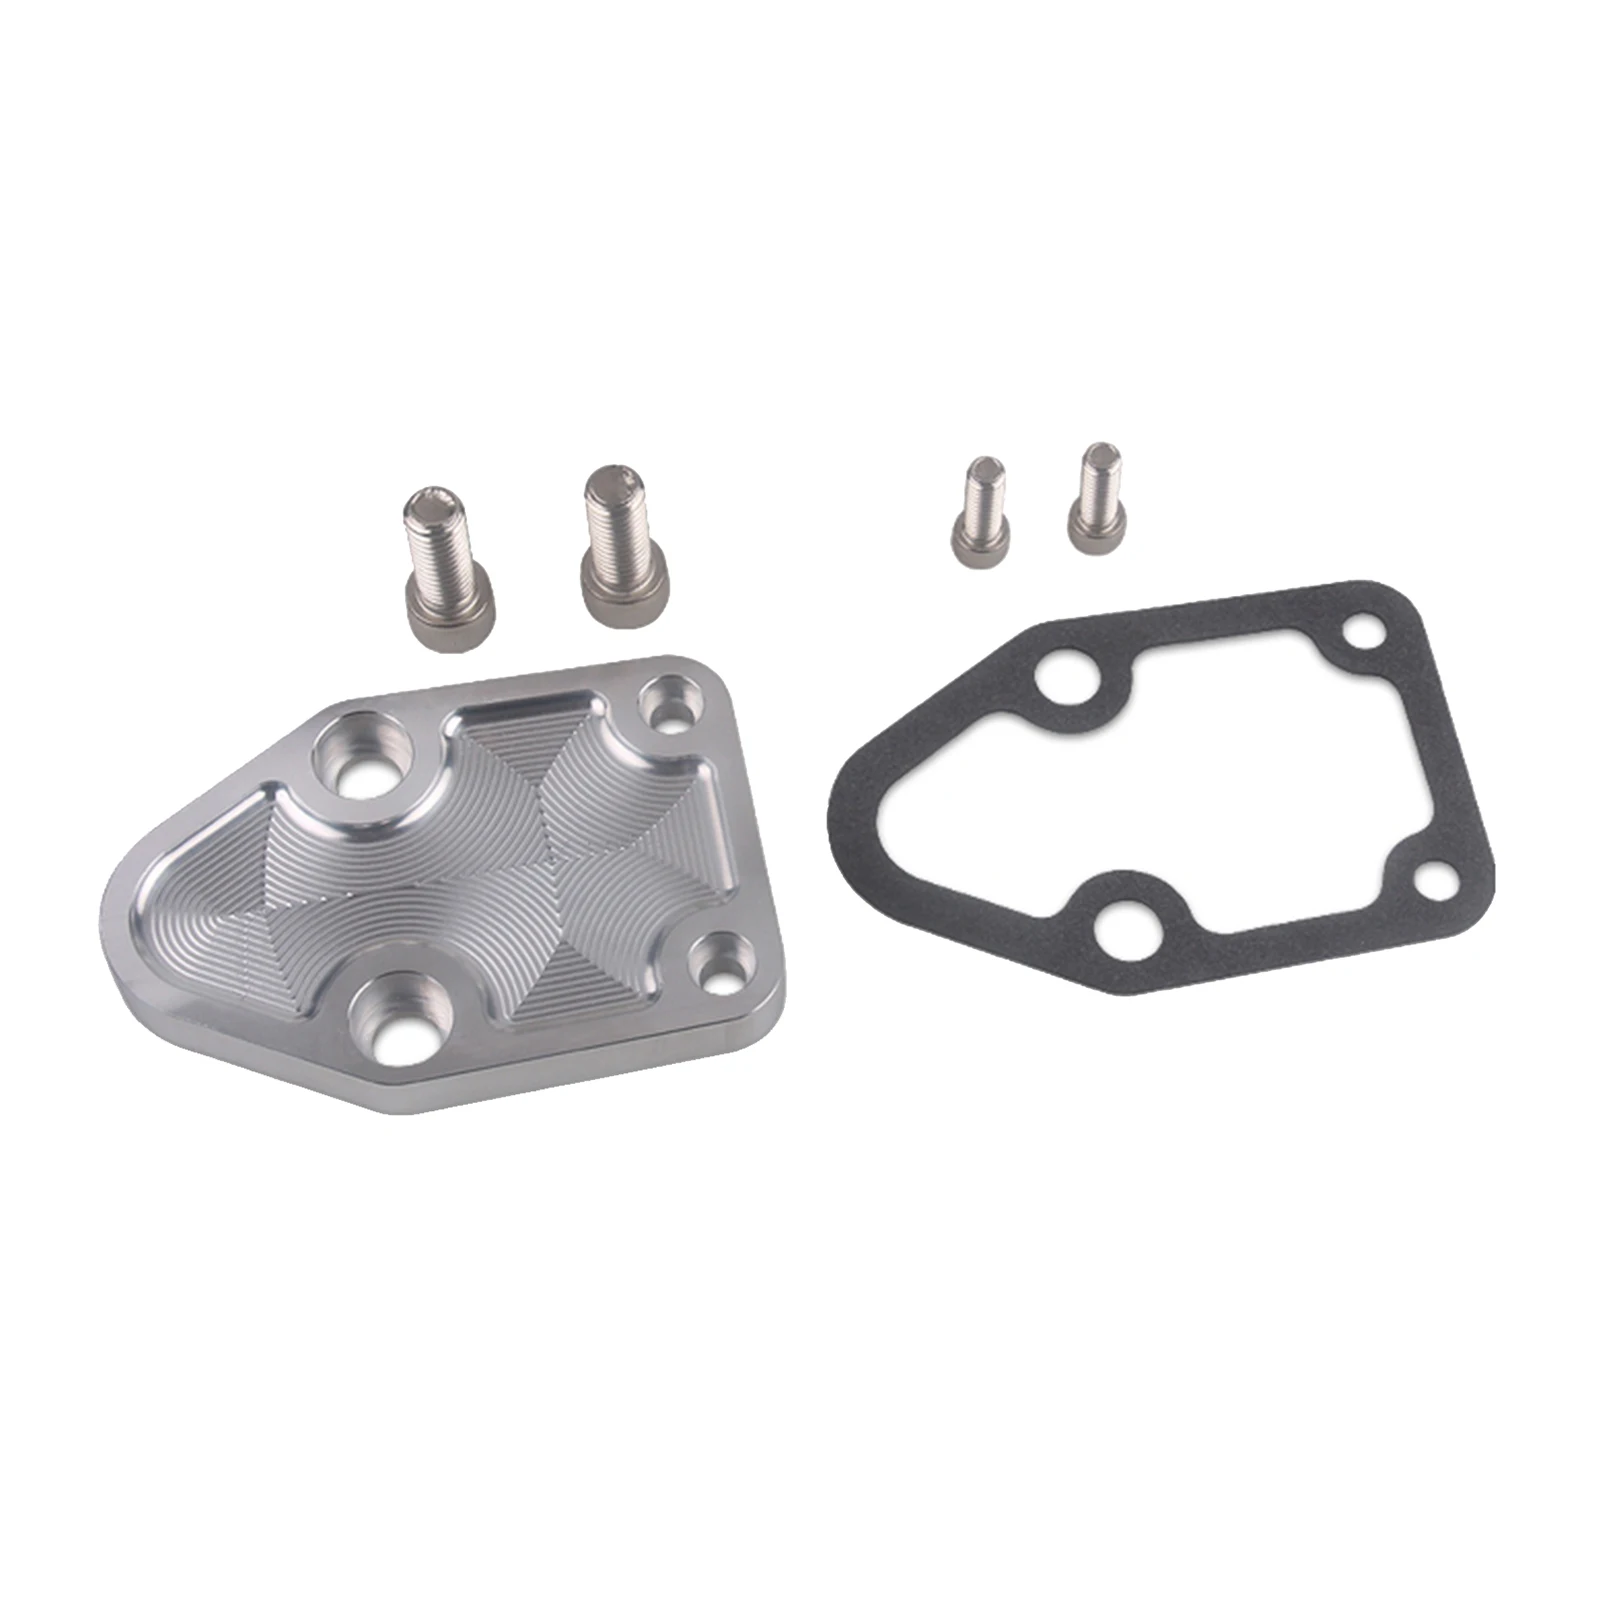 Aluminum Fuel Pump Mounting Plate Set Replace for CHEVY 283 327 350 400